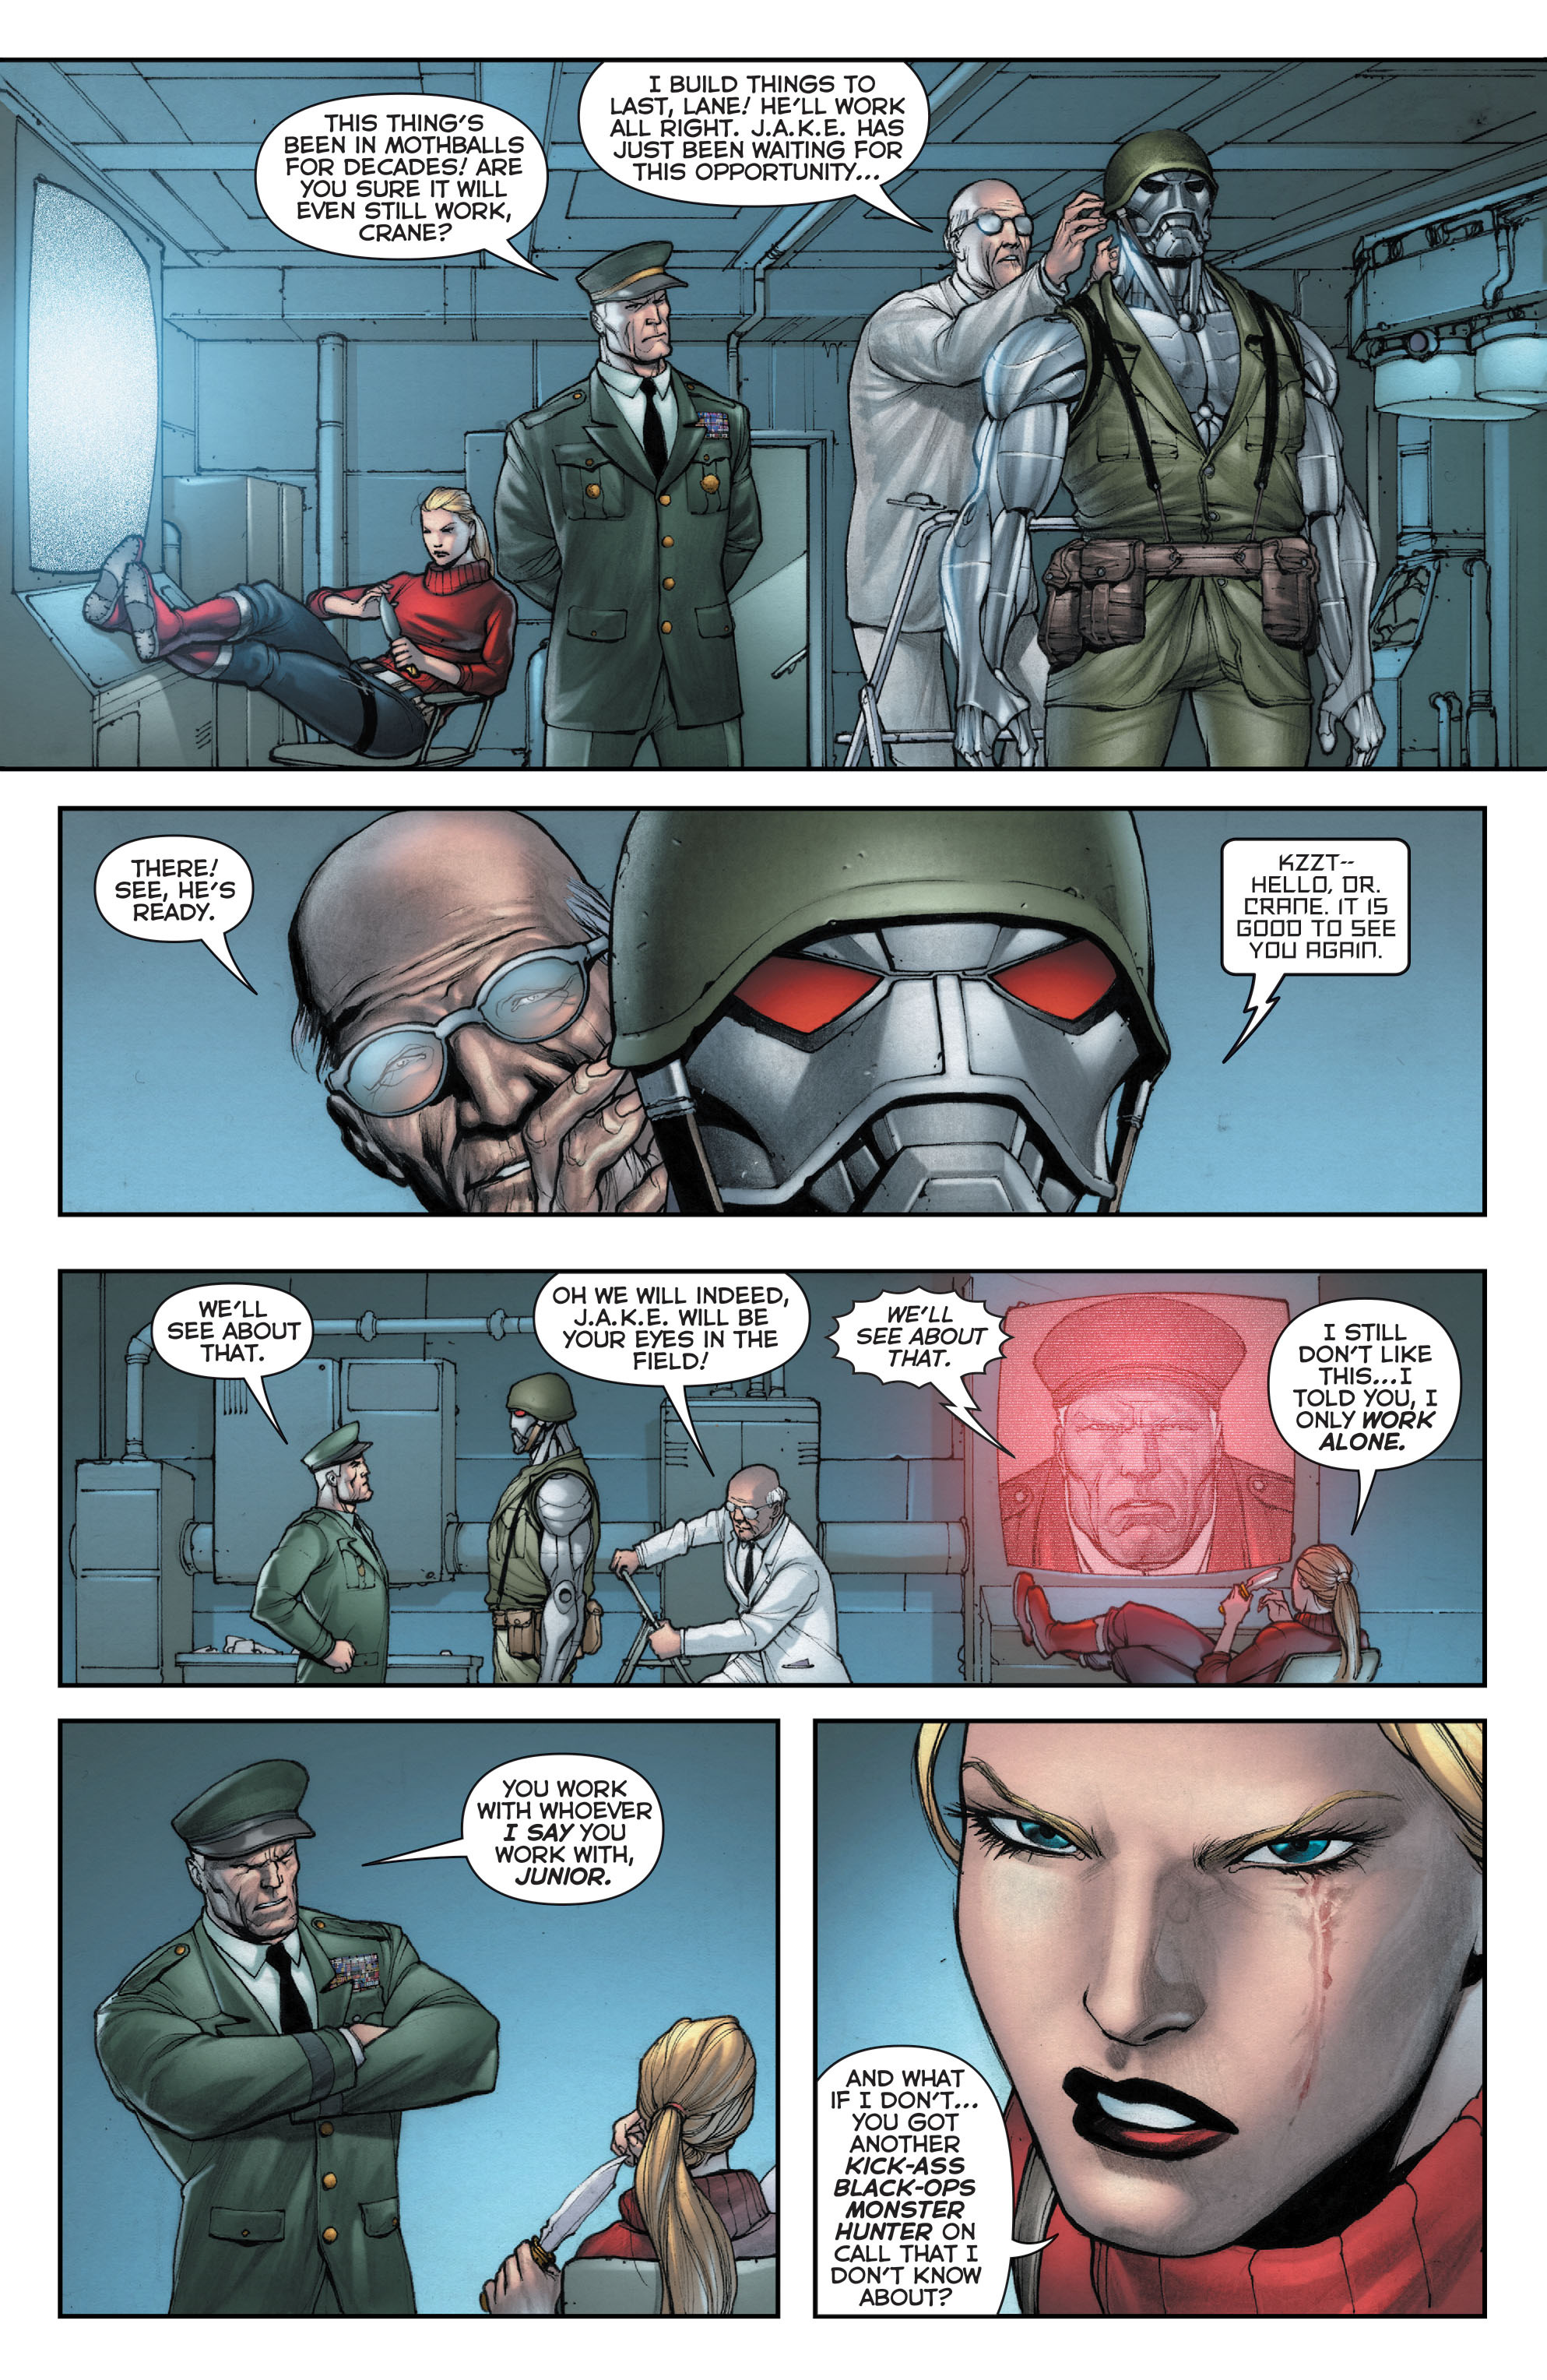 Flashpoint: The World of Flashpoint Featuring Green Lantern Full #1 - English 88